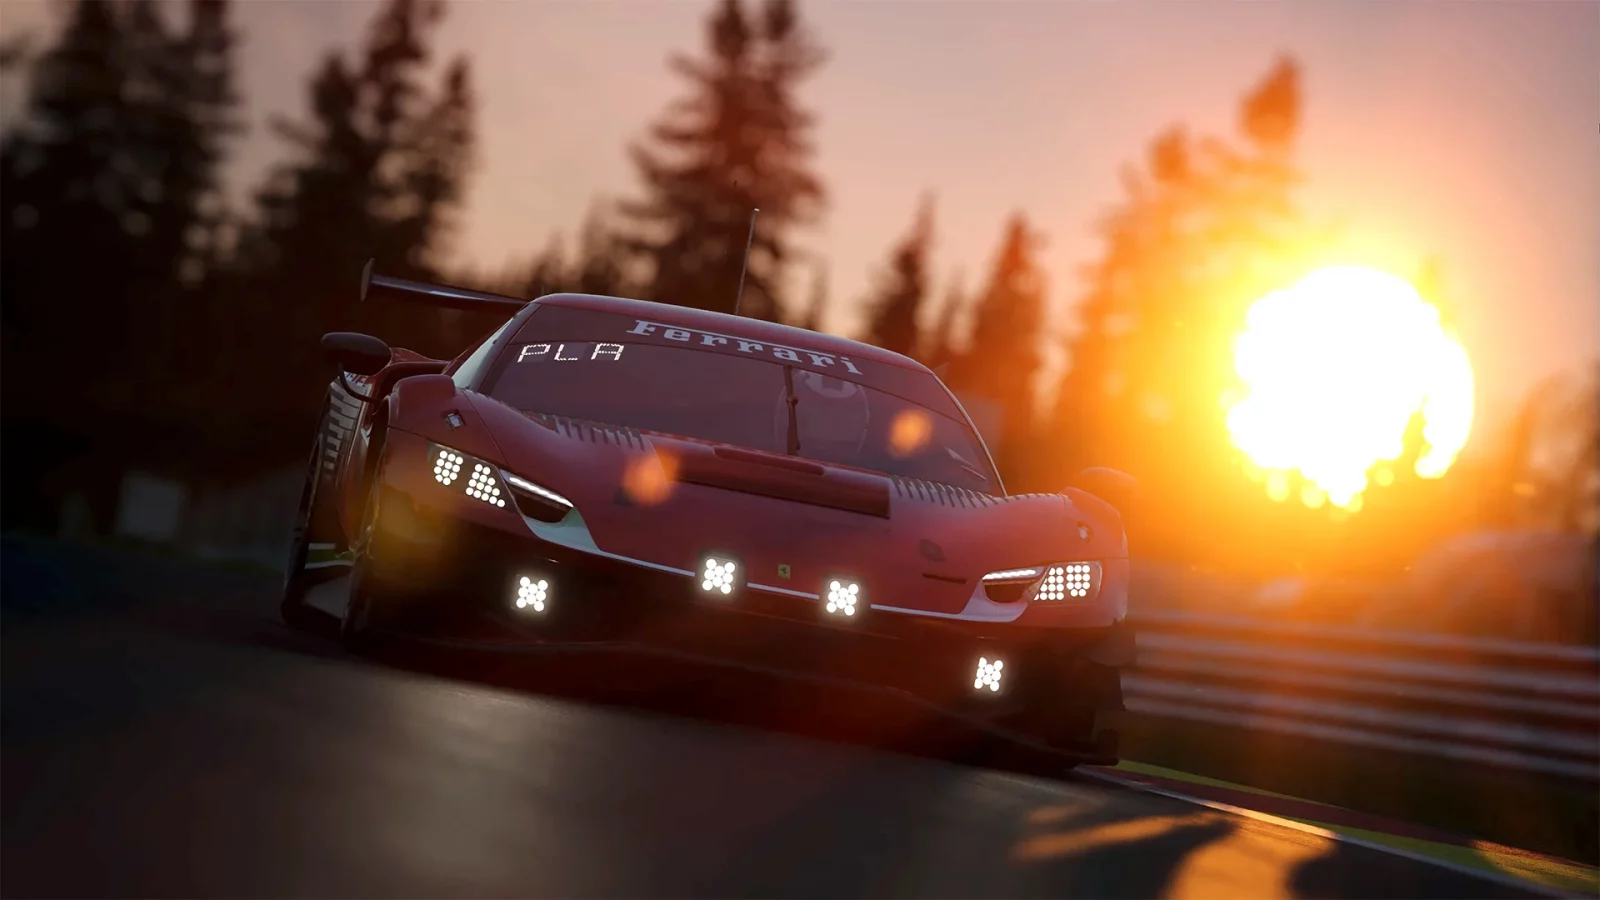 A Ferrari 296 GT3 driving on a track with the sun setting behind.